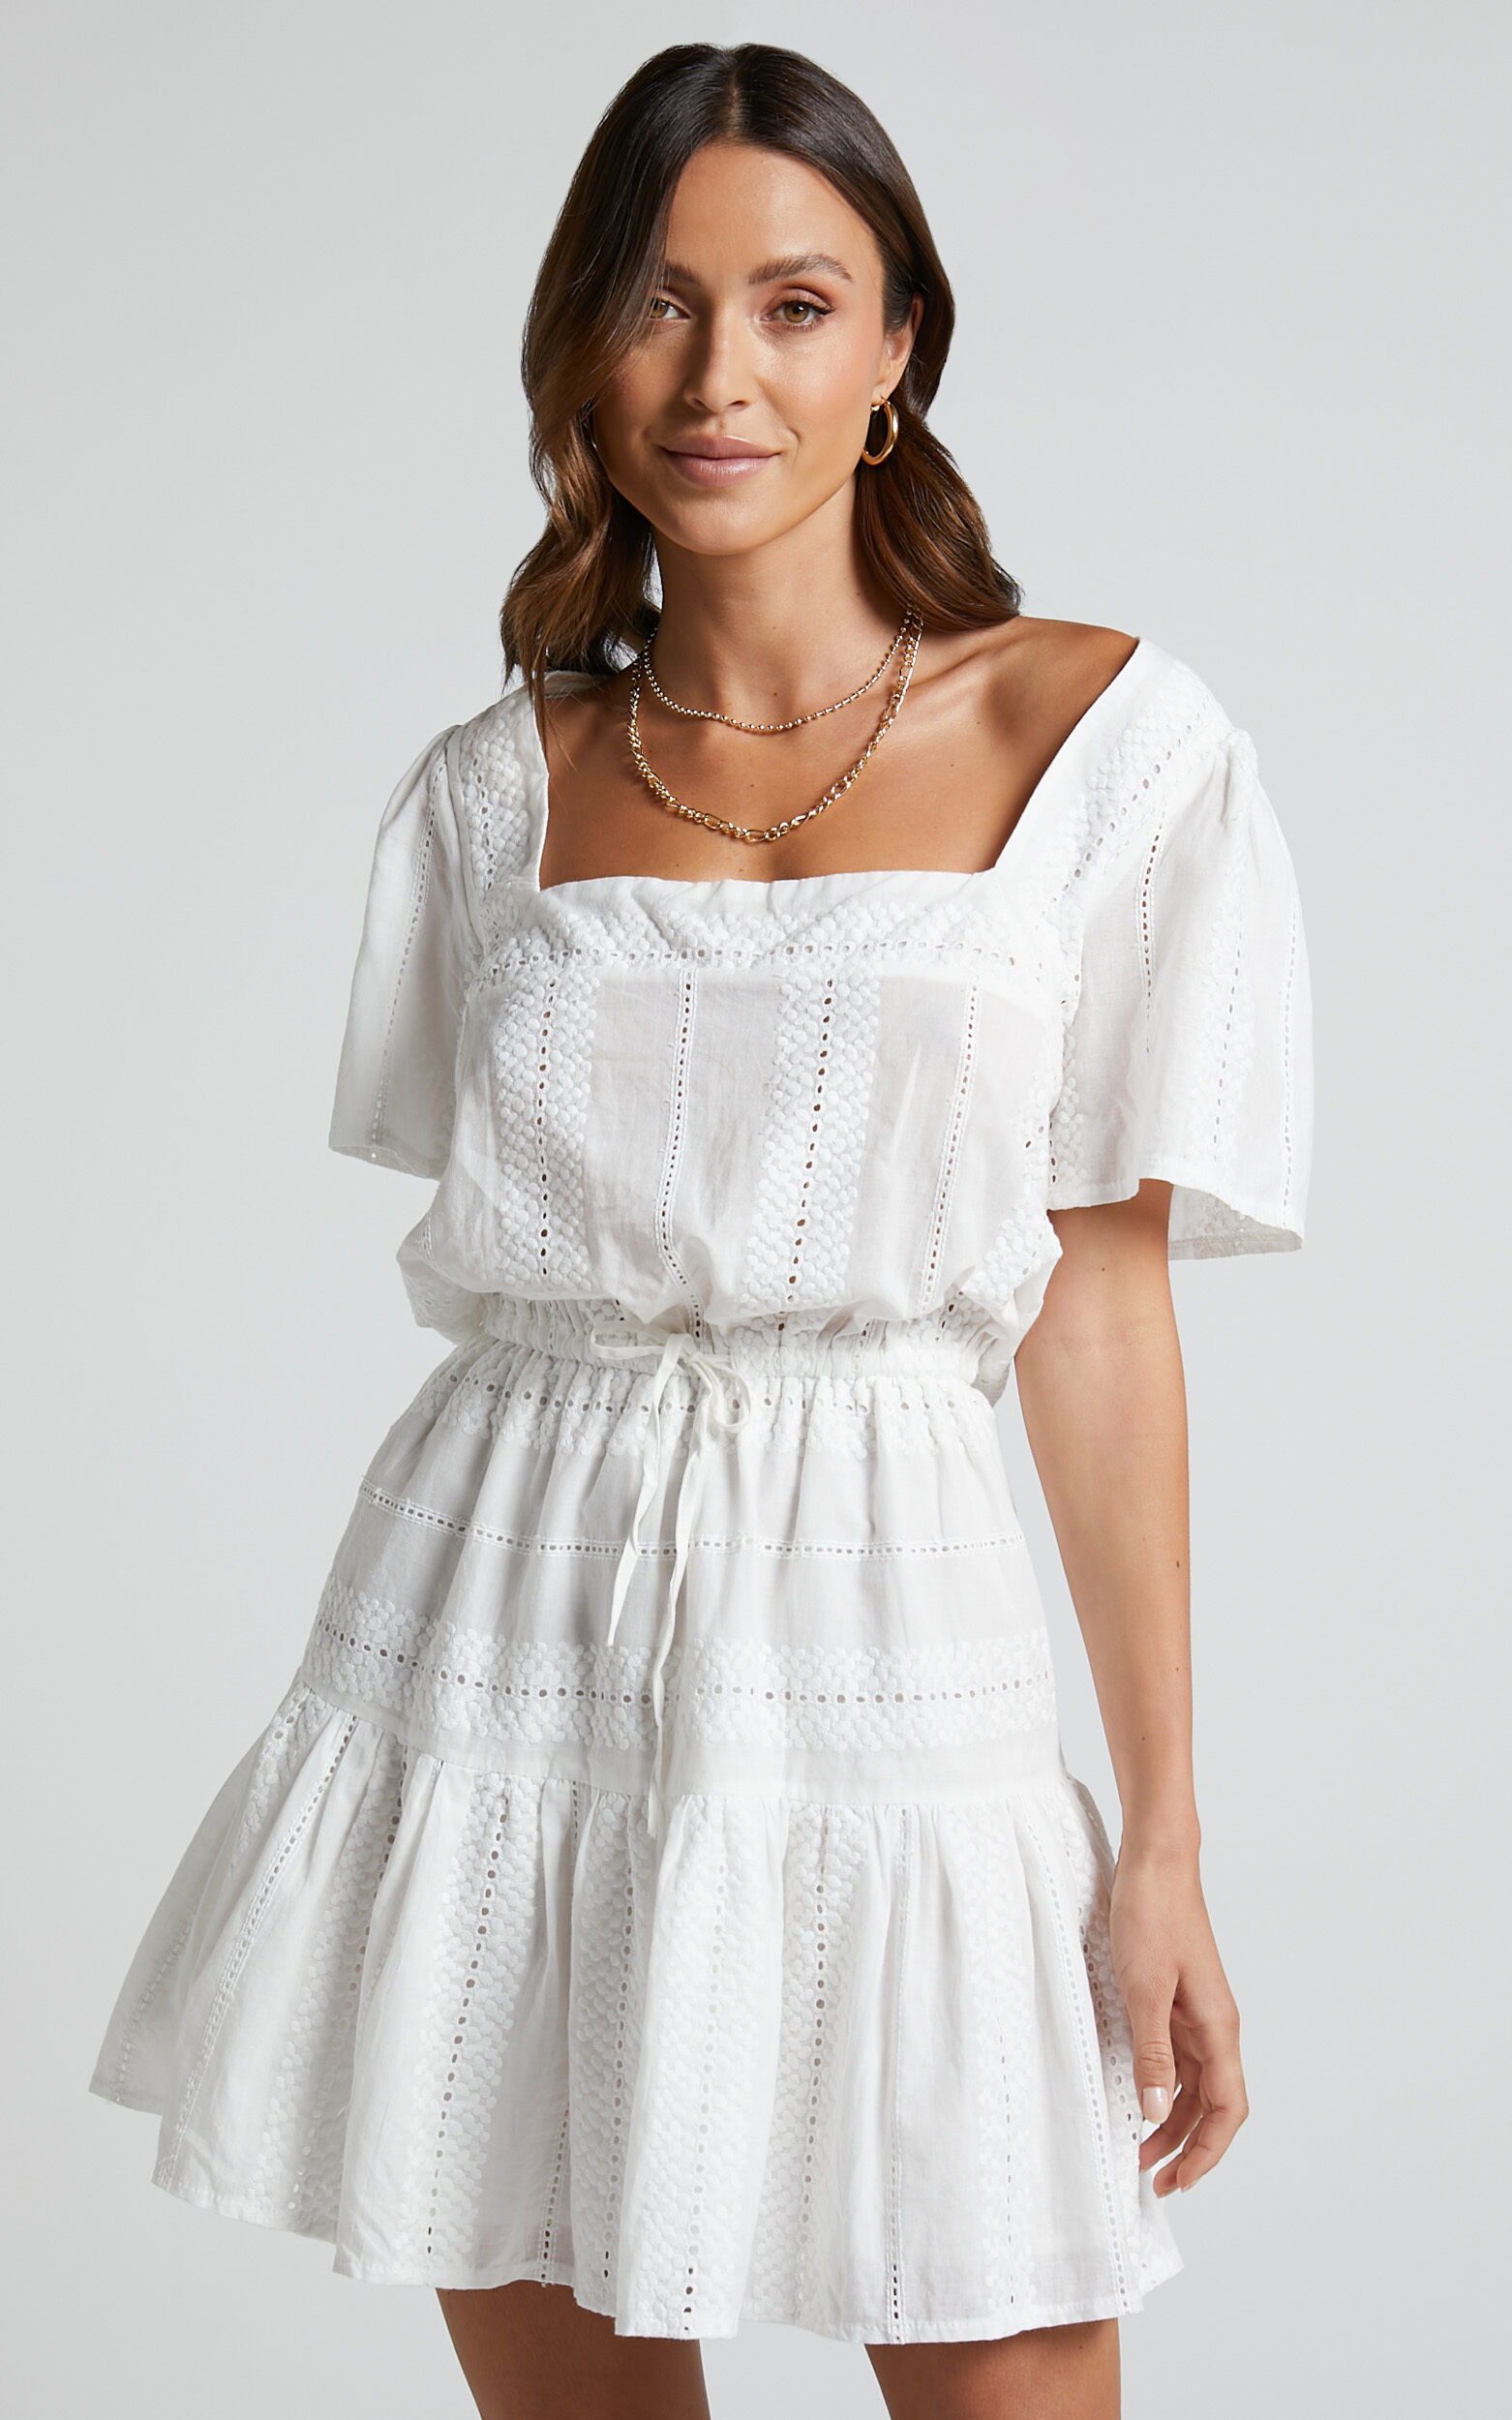 Lanzy Mini Dress - Short Sleeve Square Neck Broderie Dress in White - 06, WHT1, super-hi-res image number null